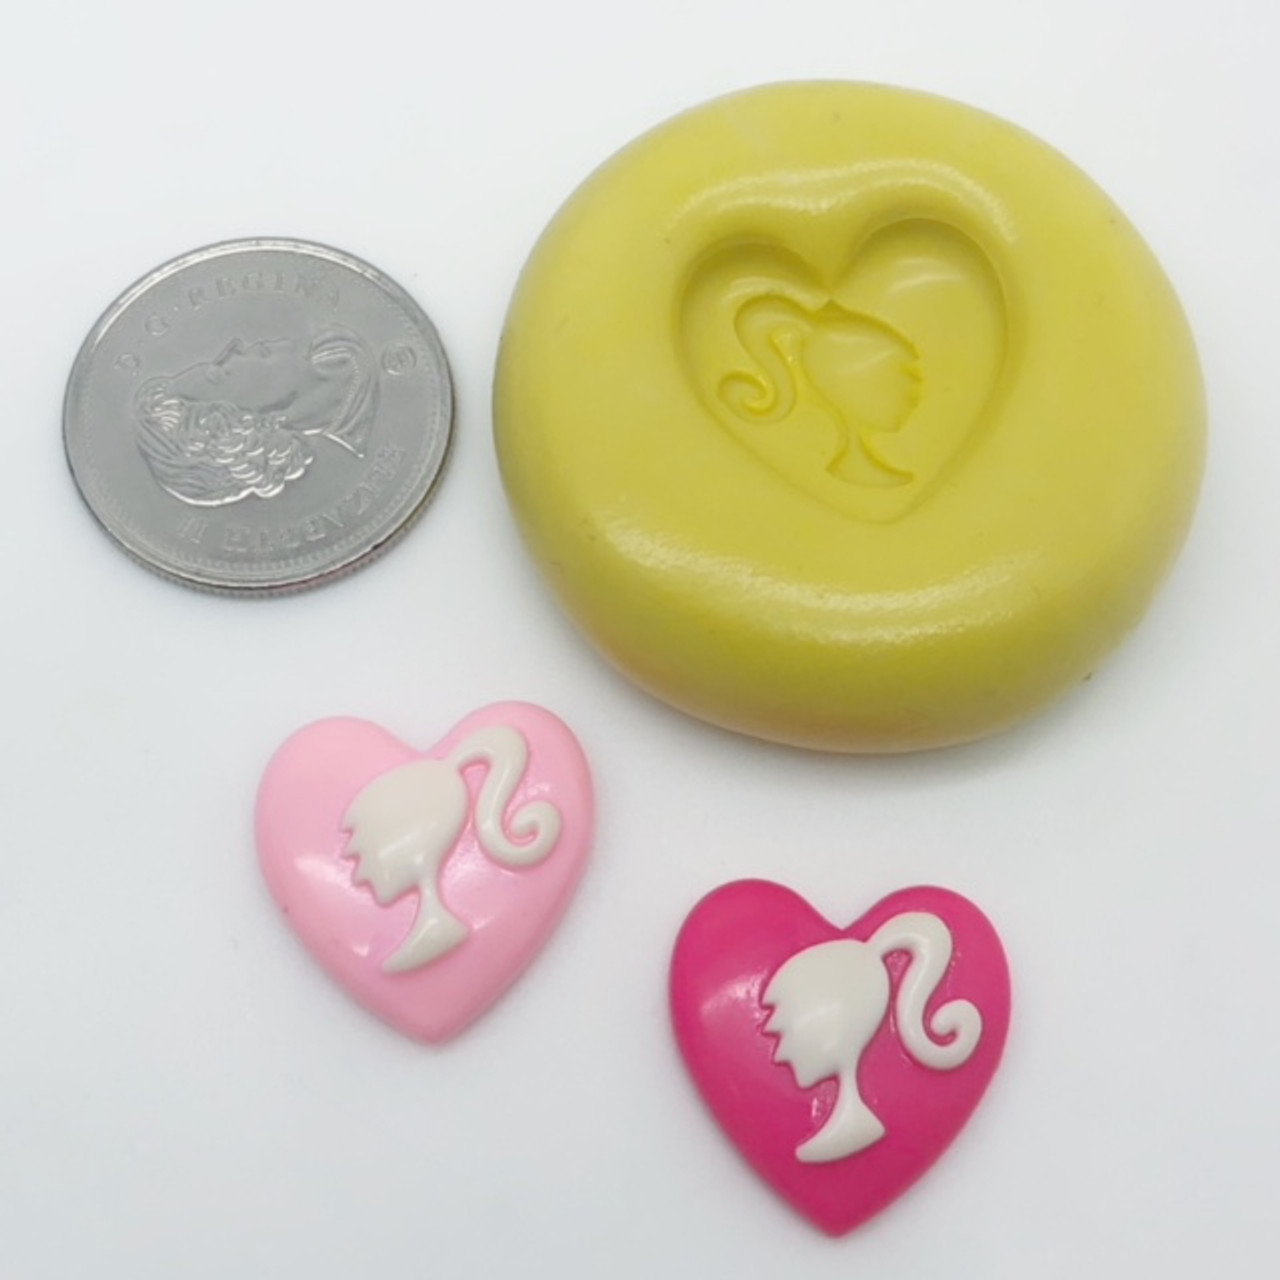 Barbie Word Mold Silicone mold - Christines Molds